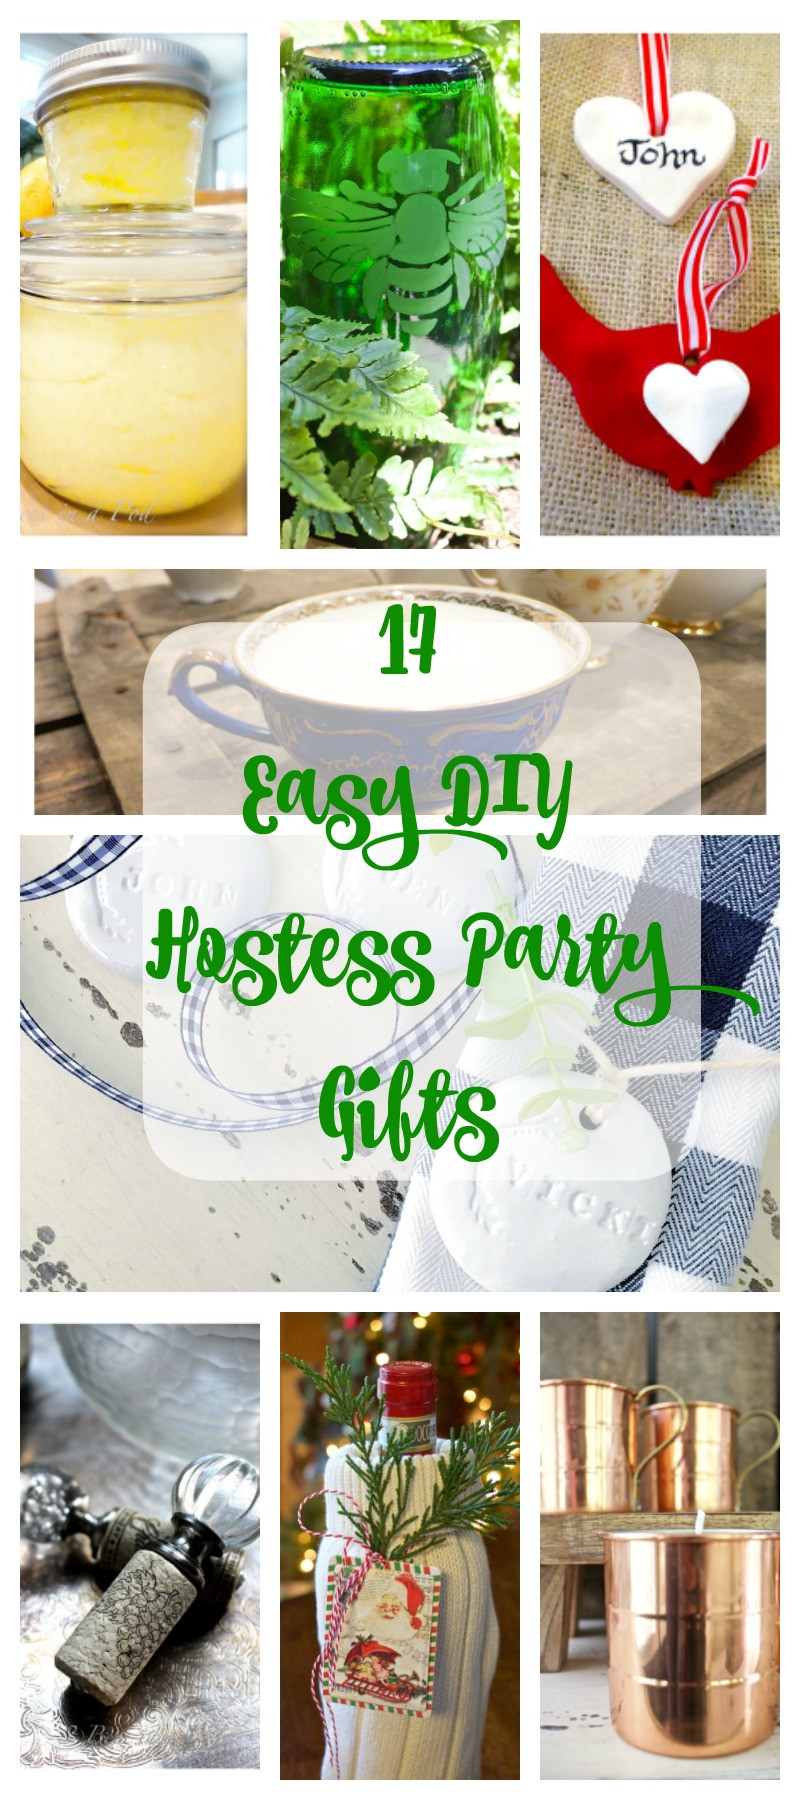 Pinterest DIY Gifts
 17 Ideas for Easy DIY Holiday Hostess Gifts 2 Bees in a Pod